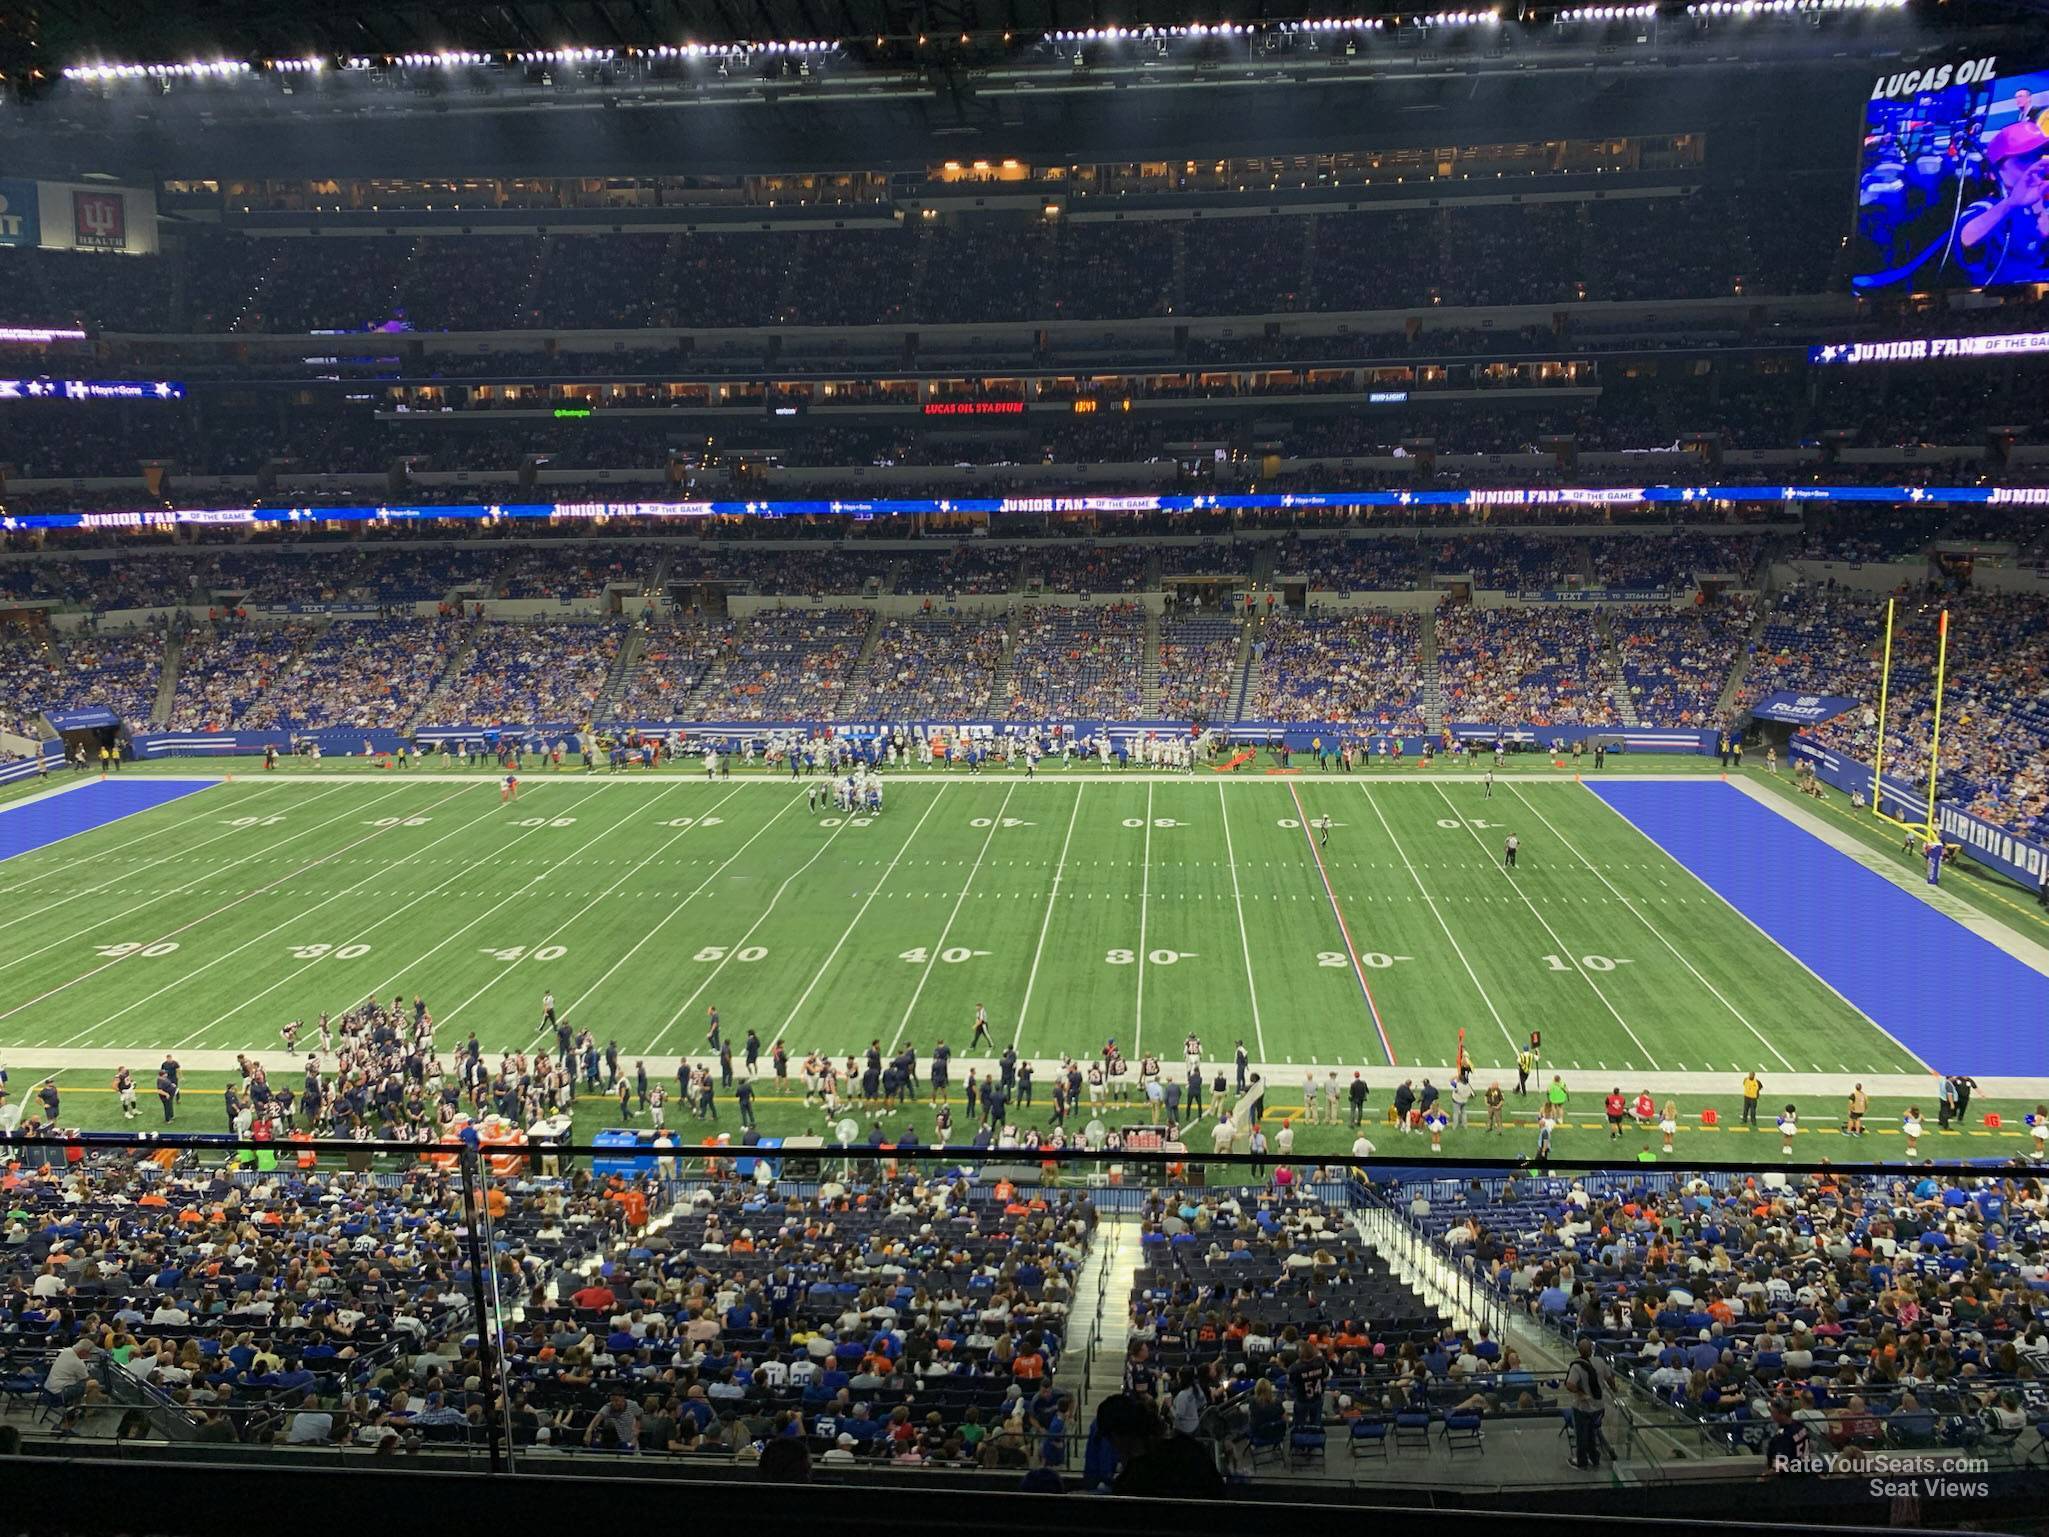 section 412, row 1 seat view  for football - lucas oil stadium